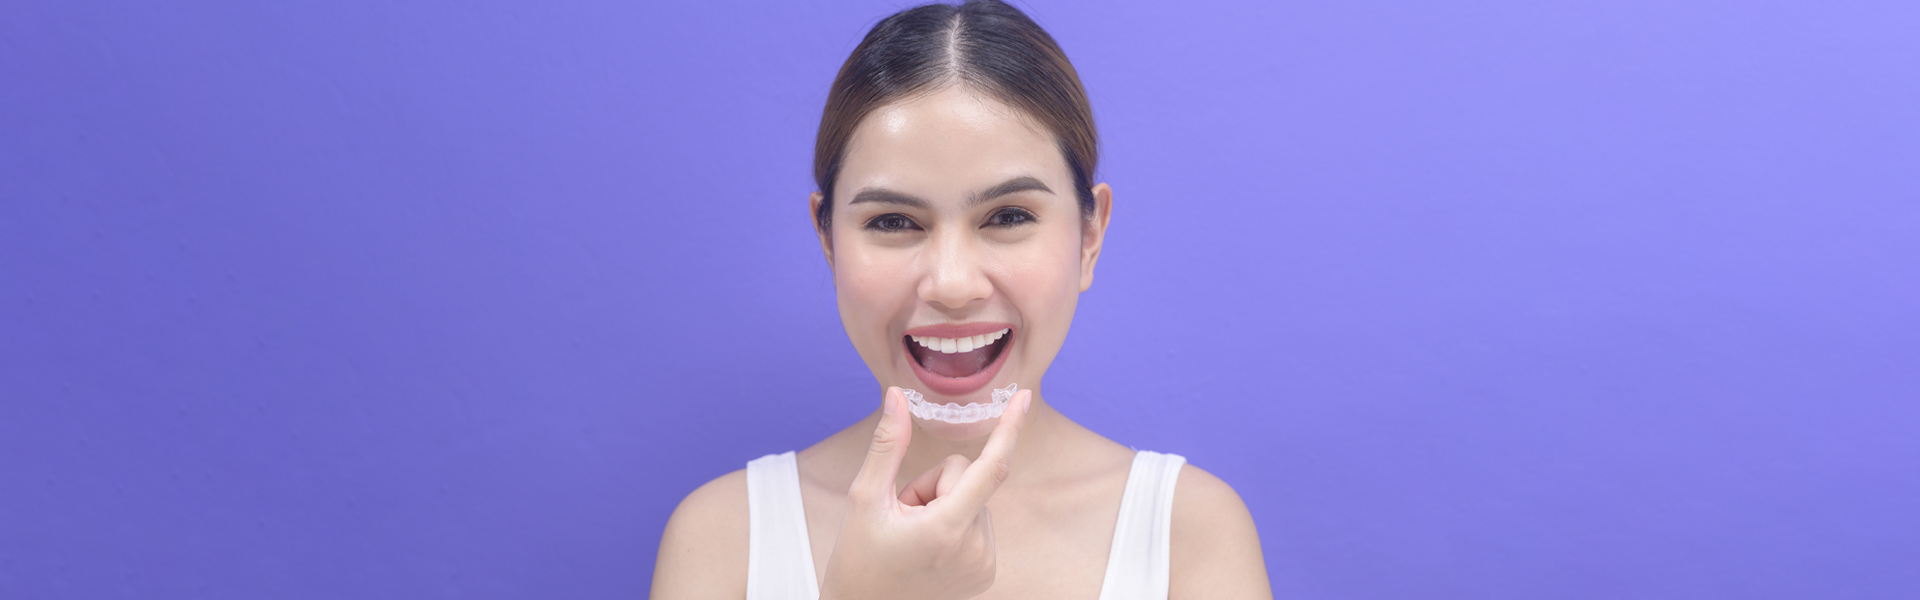 Is Invisalign Treatment Right for Your Smile?